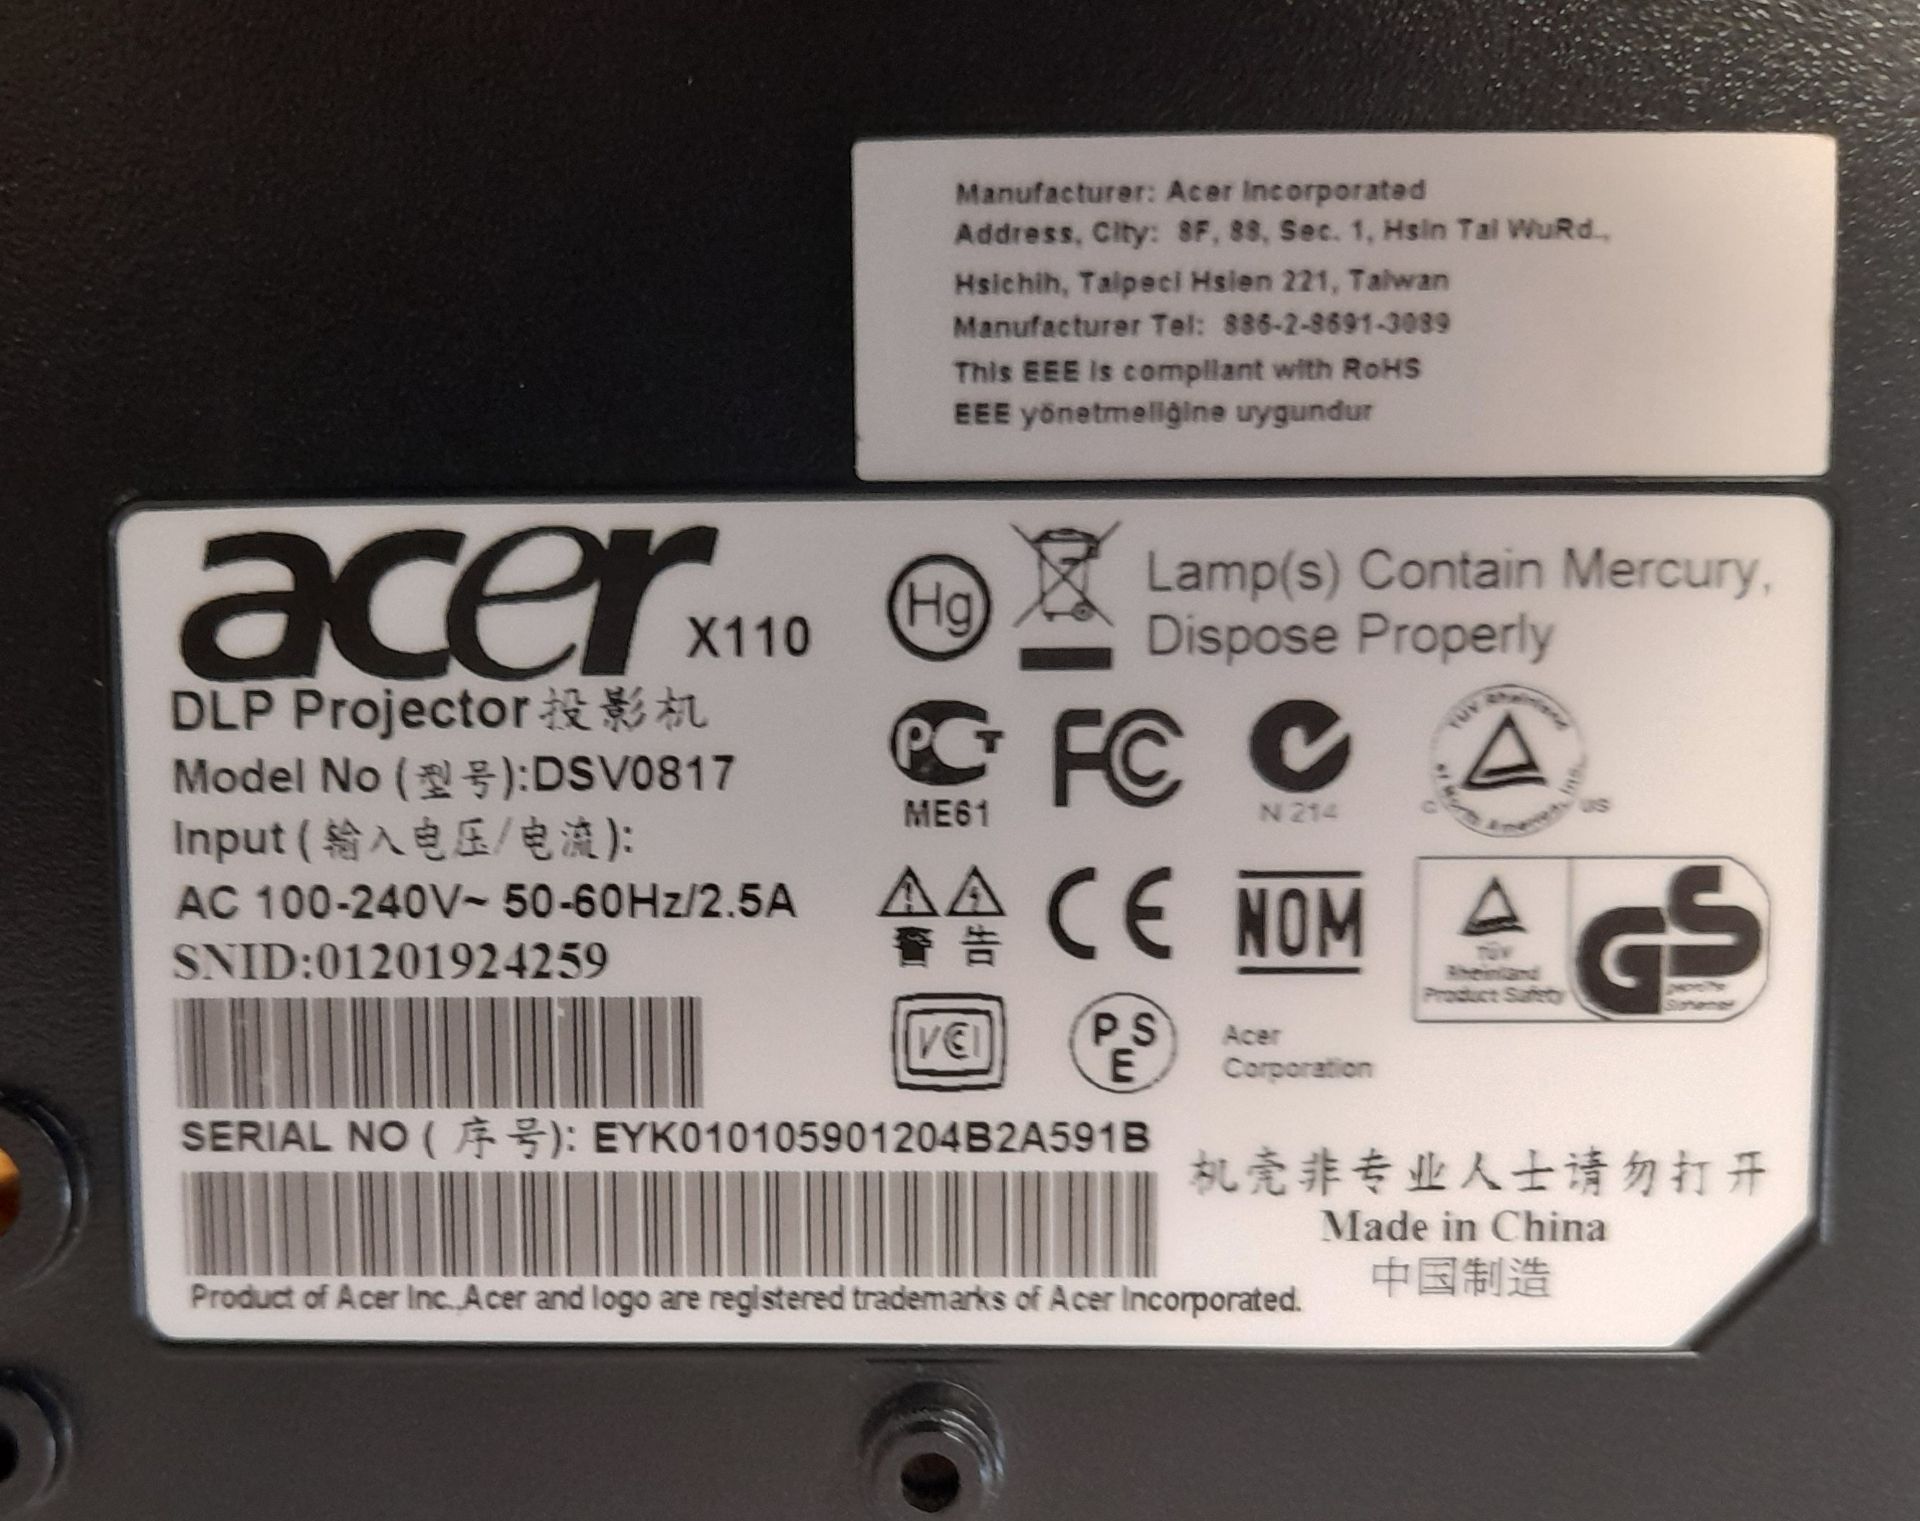 Acer XL110 DLP projector - Image 2 of 2